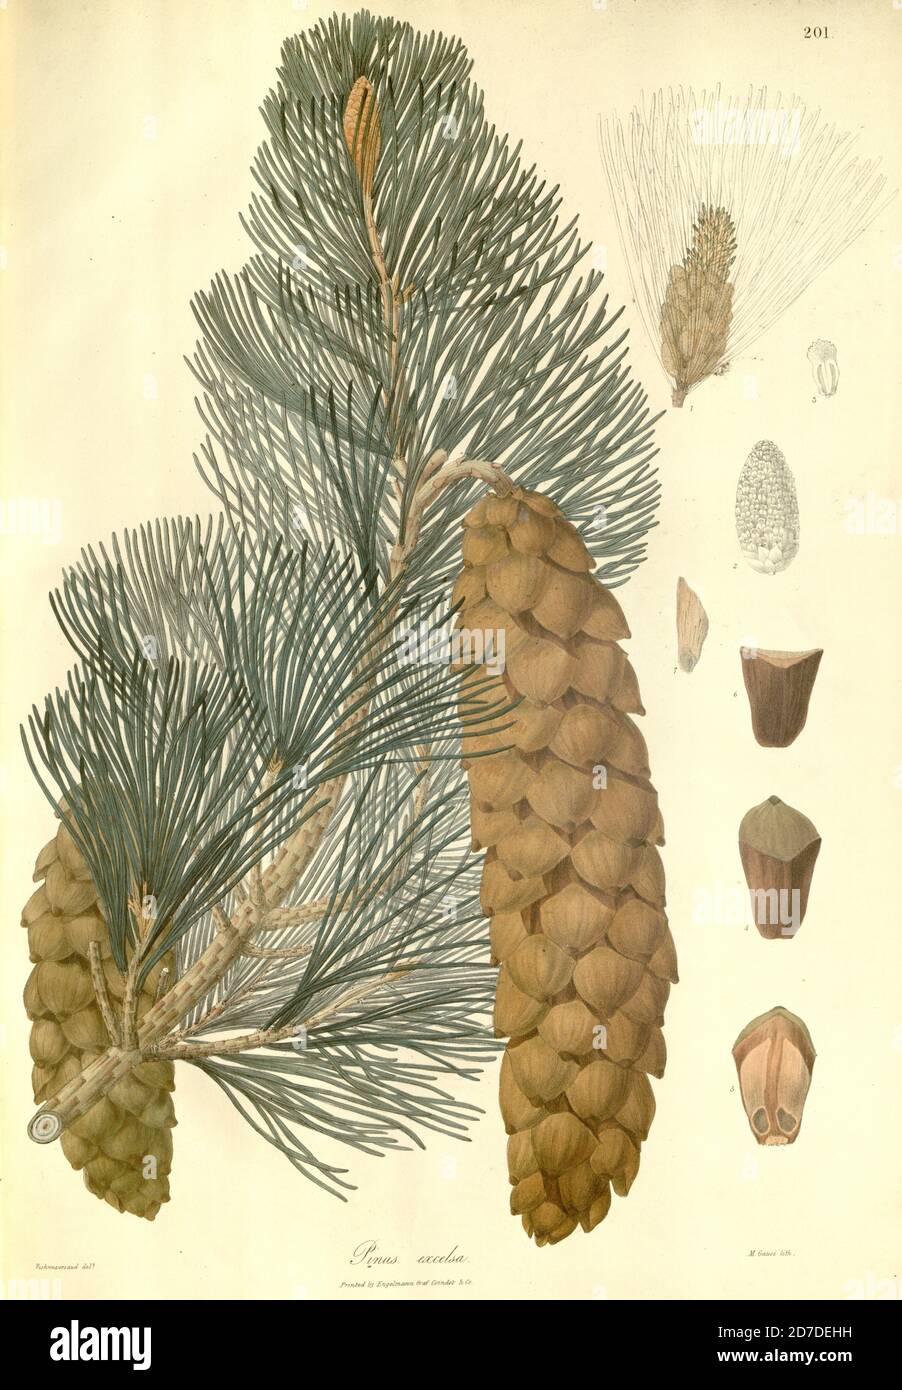 Pinus wallichiana [Here as Pinus excelsa] is a coniferous evergreen tree native to the Himalaya, Karakoram and Hindu Kush mountains, from eastern Afghanistan east across northern Pakistan and north west India to Yunnan in southwest China. From Plantae Asiaticae rariores, or, Descriptions and figures of a select number of unpublished East Indian plants Volume III by N. Wallich. Nathaniel Wolff Wallich FRS FRSE (28 January 1786 – 28 April 1854) was a surgeon and botanist of Danish origin who worked in India, initially in the Danish settlement near Calcutta and later for the Danish East India Com Stock Photo